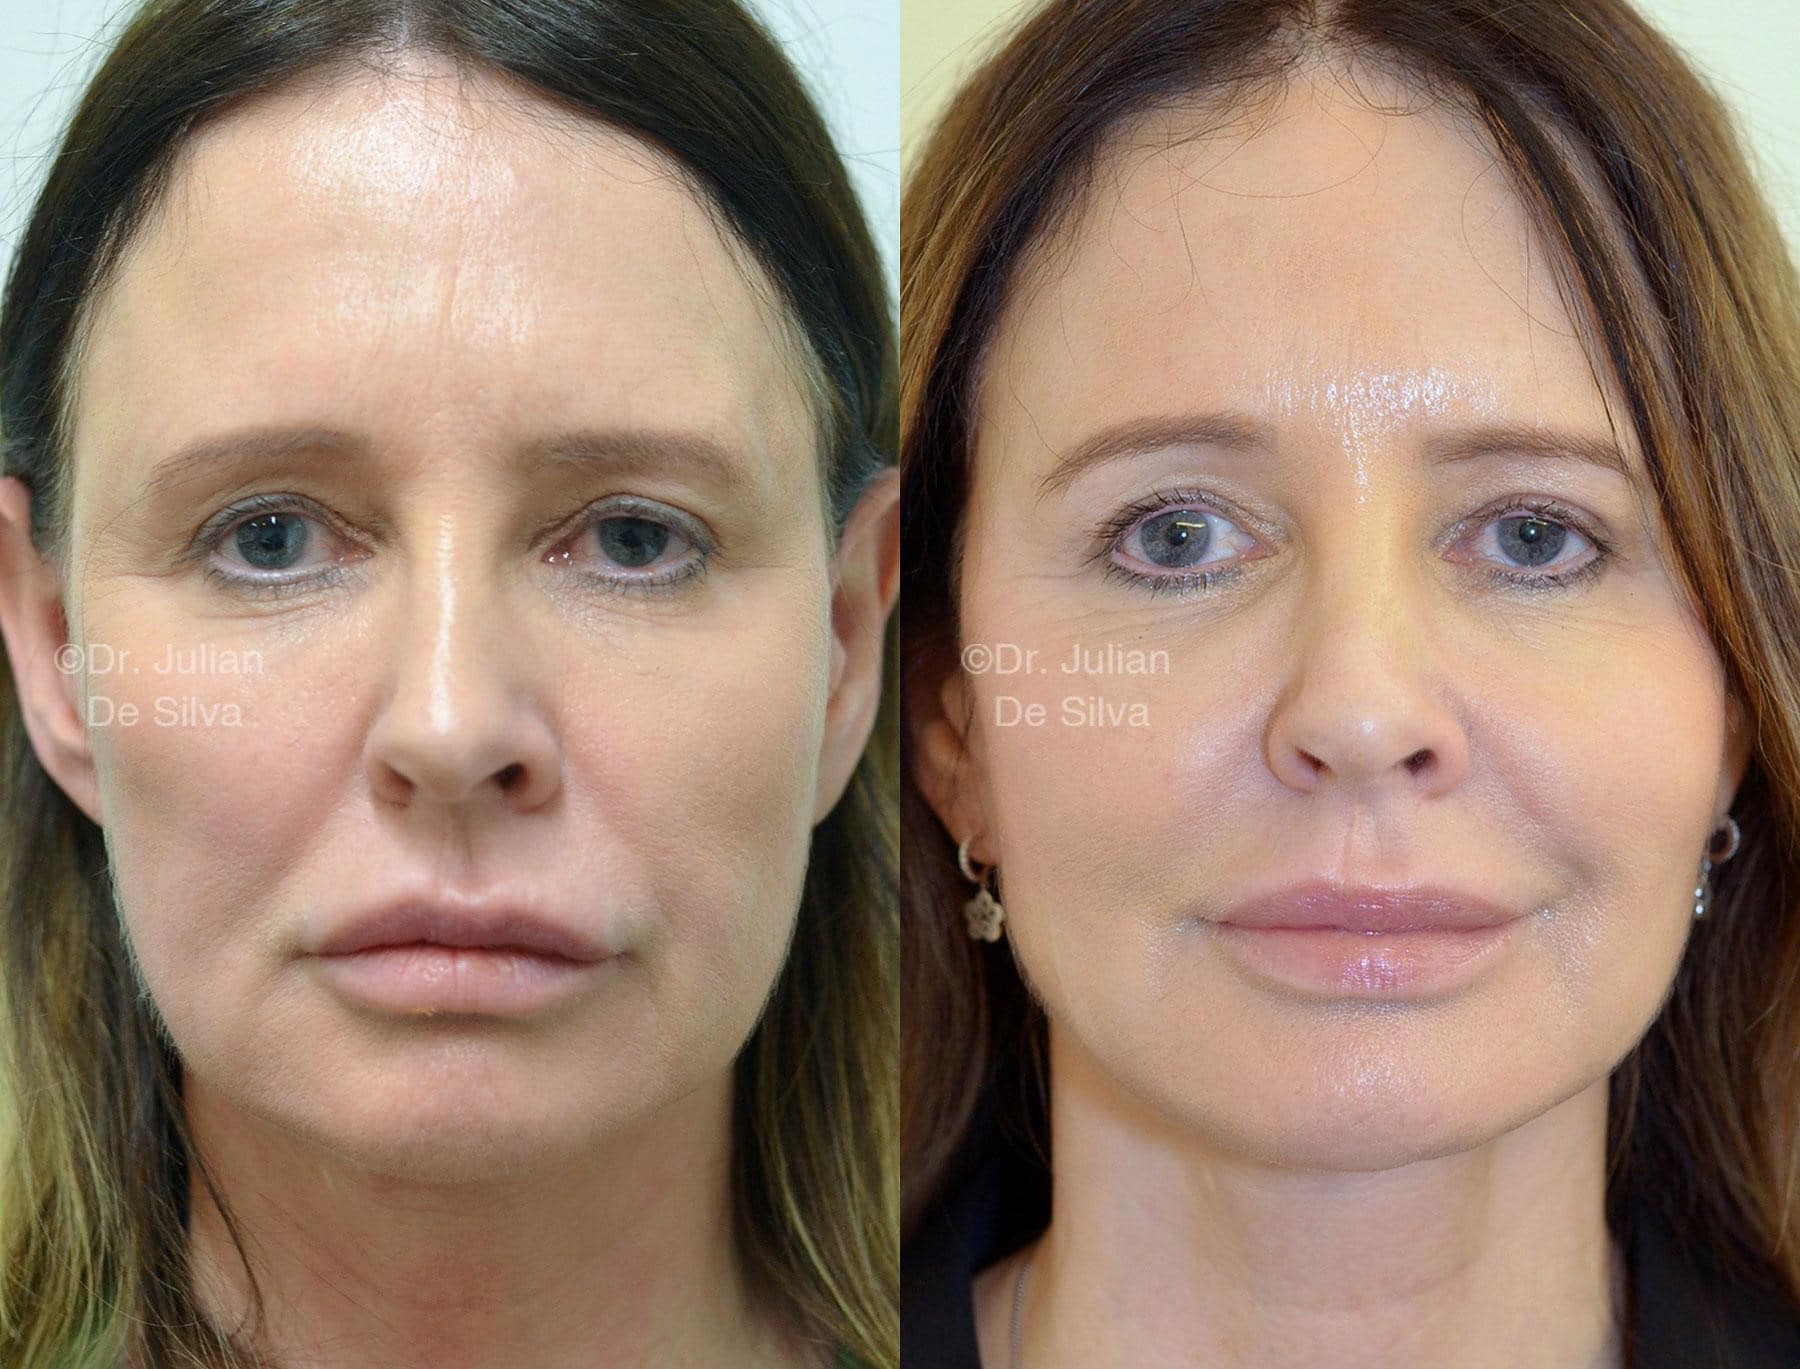 Female face, before and after Facelift treatment, front view, patient 2